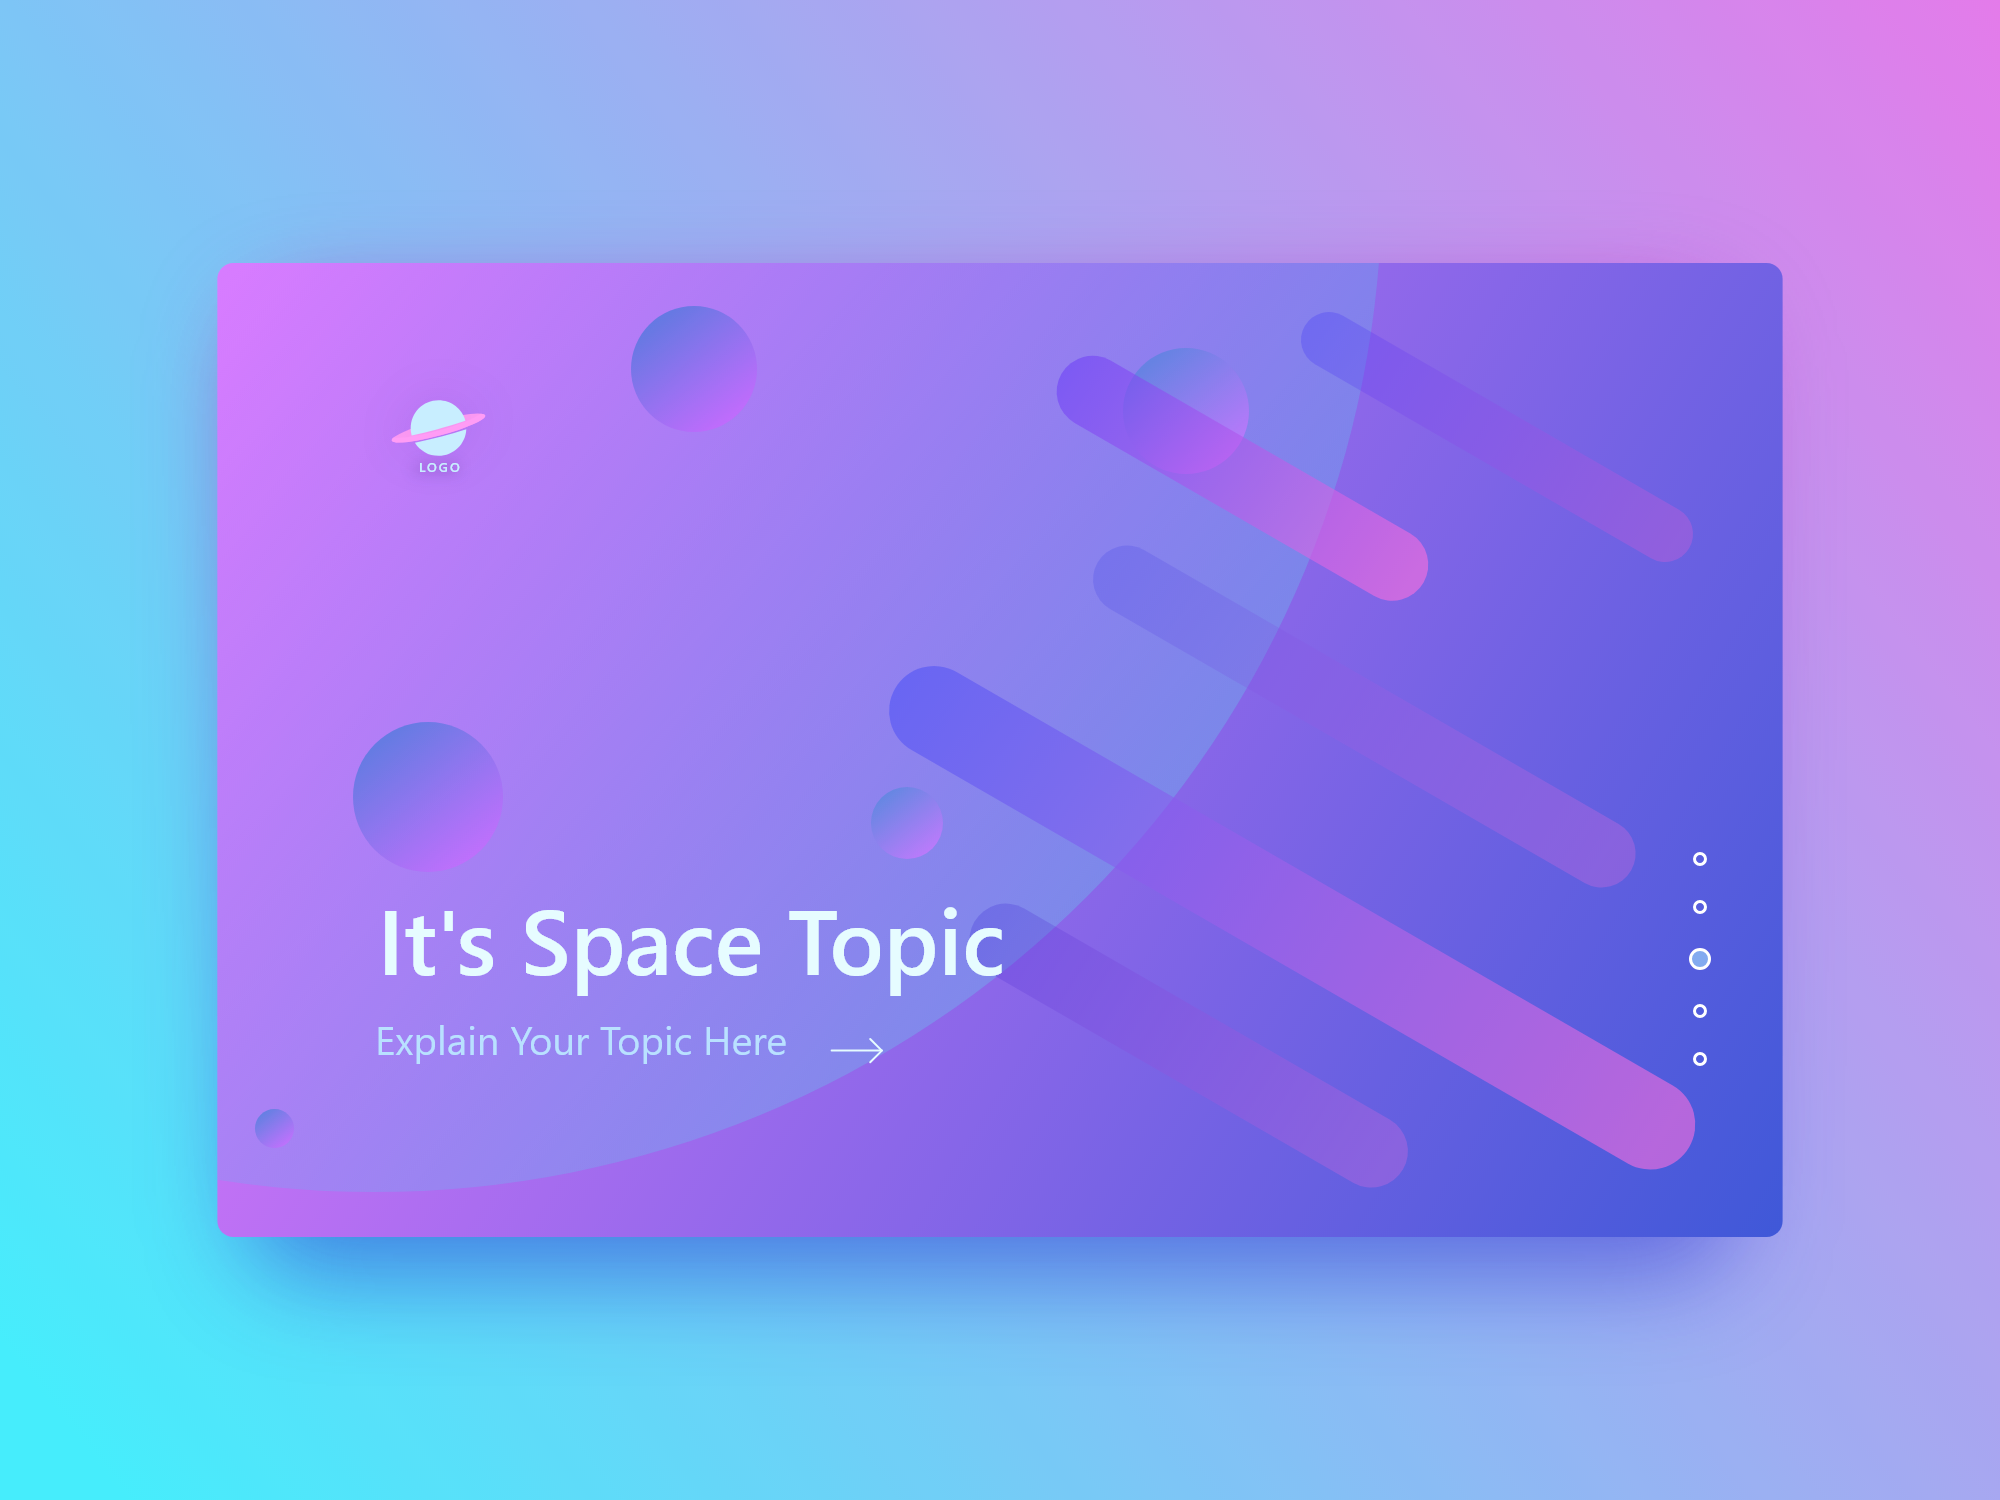 Topic space